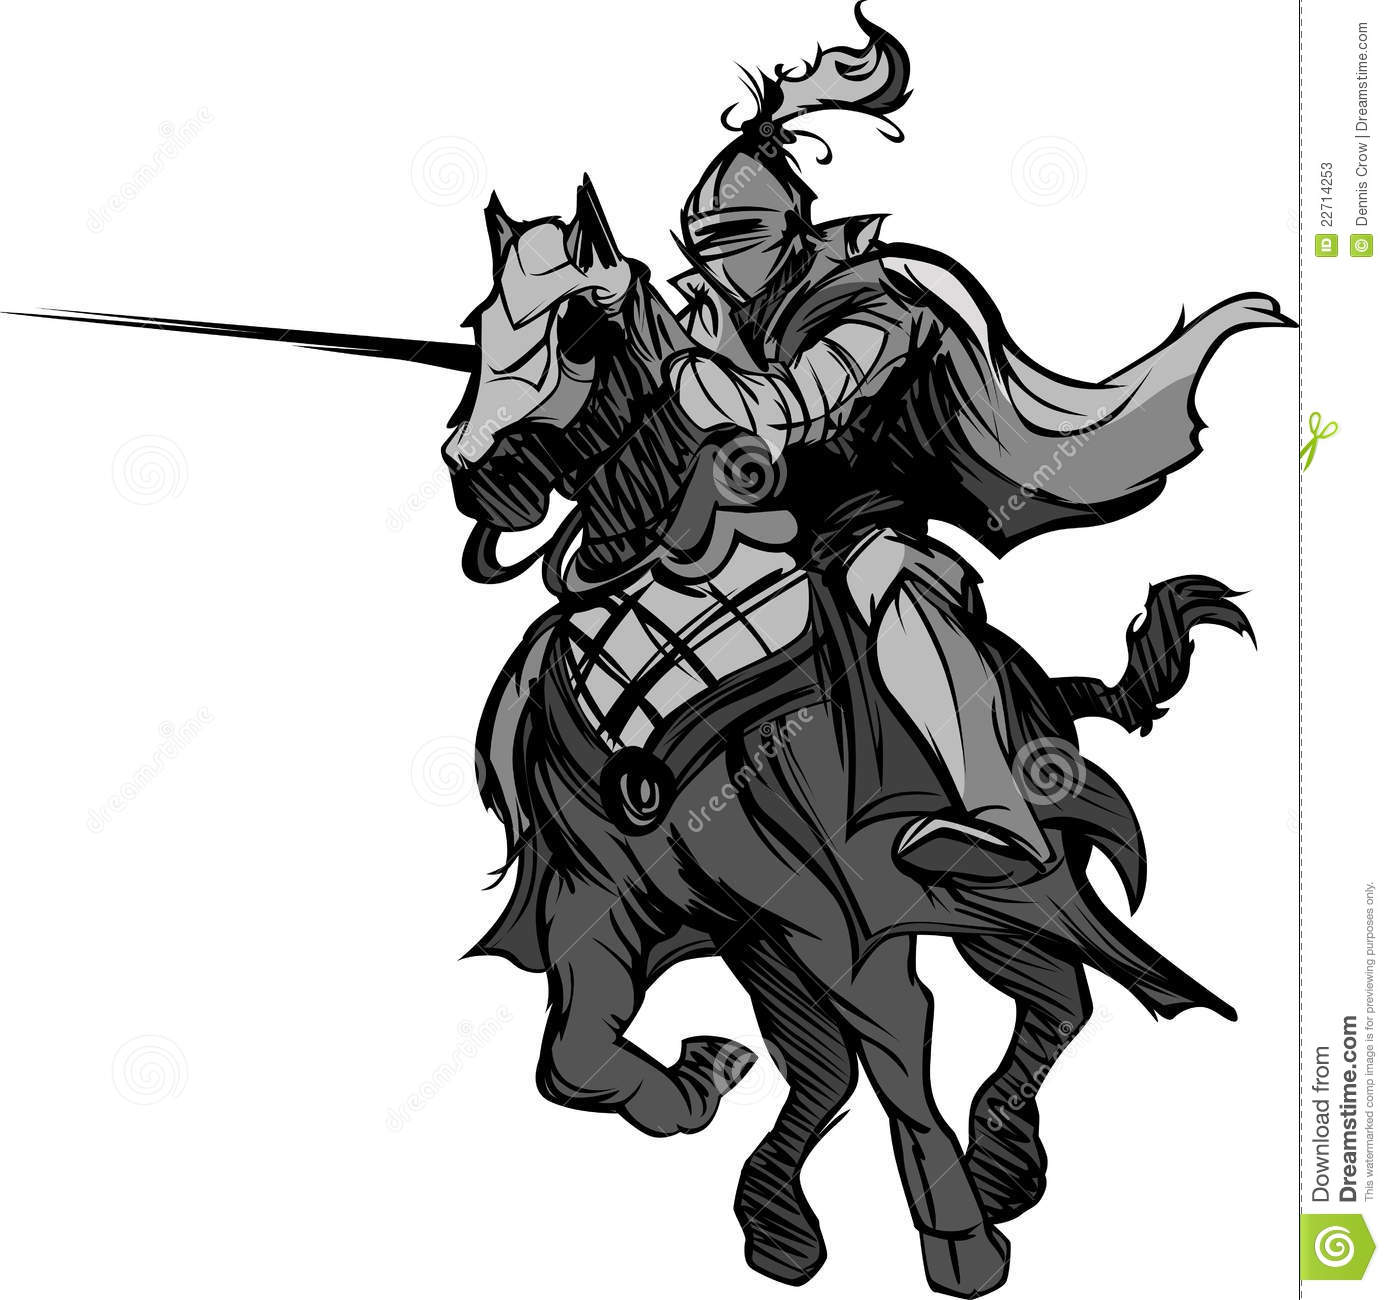 More Similar Stock Images Of   Jousting Knight Mascot On Horse